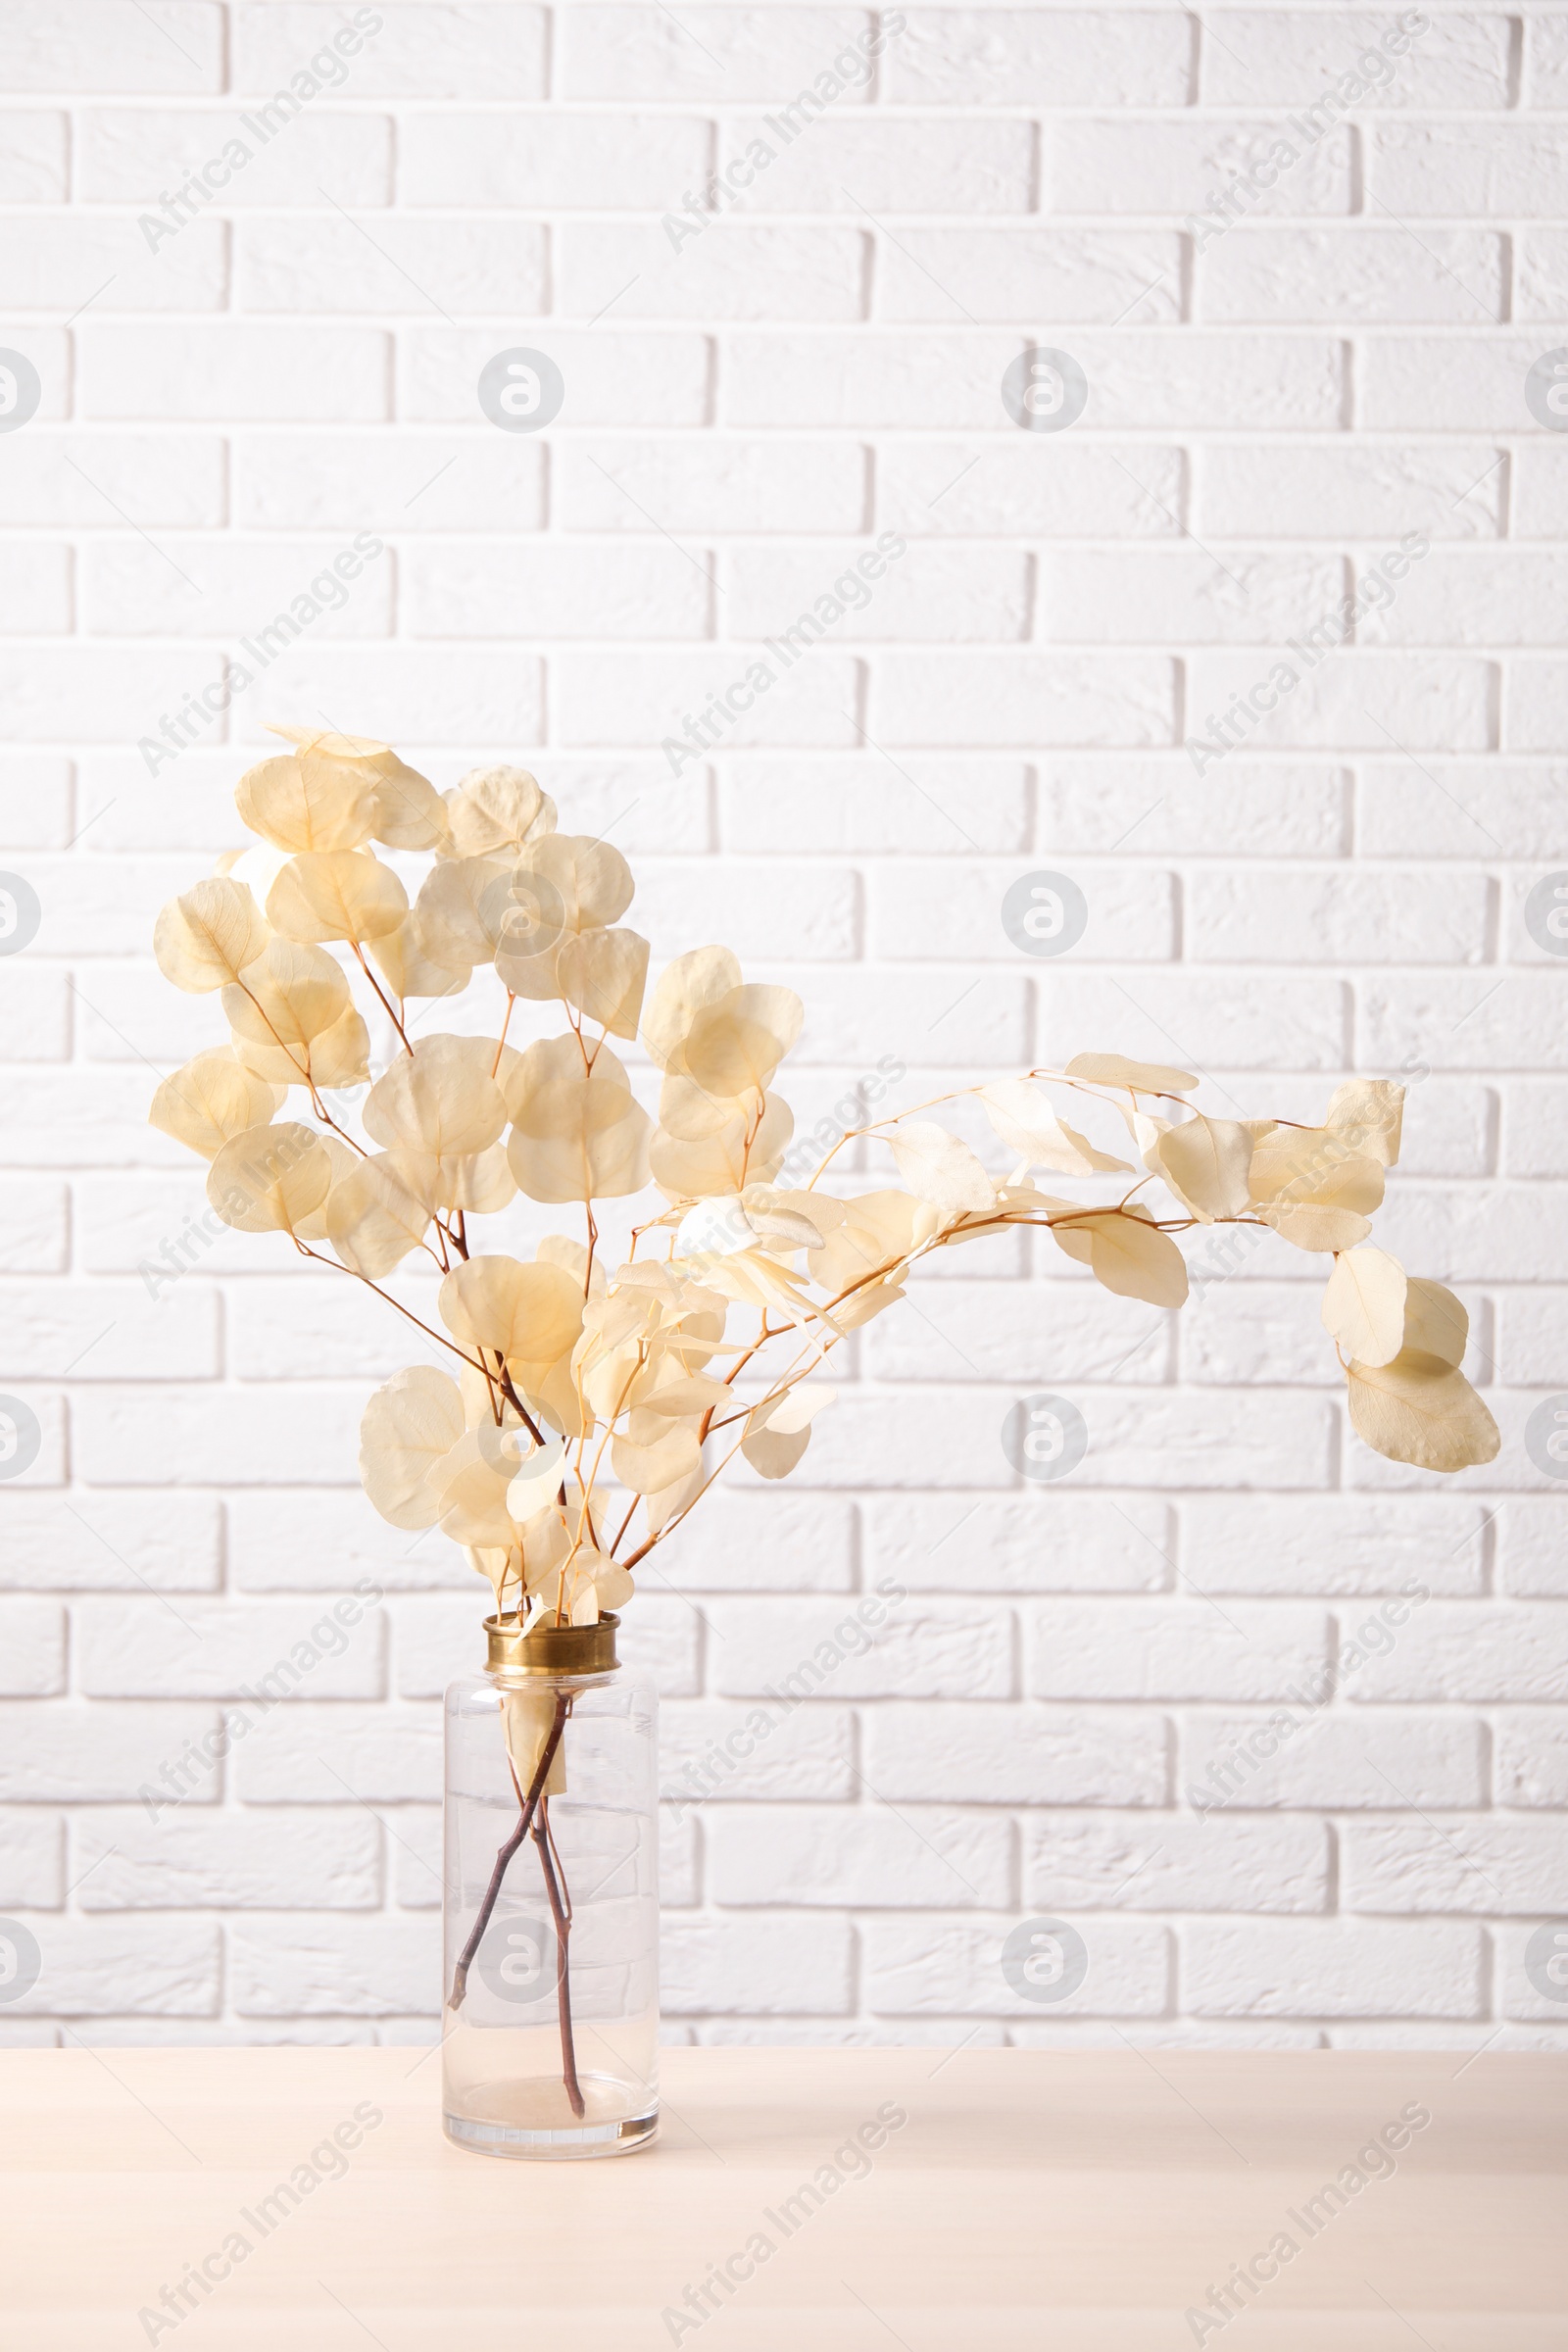 Photo of Dried eucalyptus branches in vase on table against white brick wall